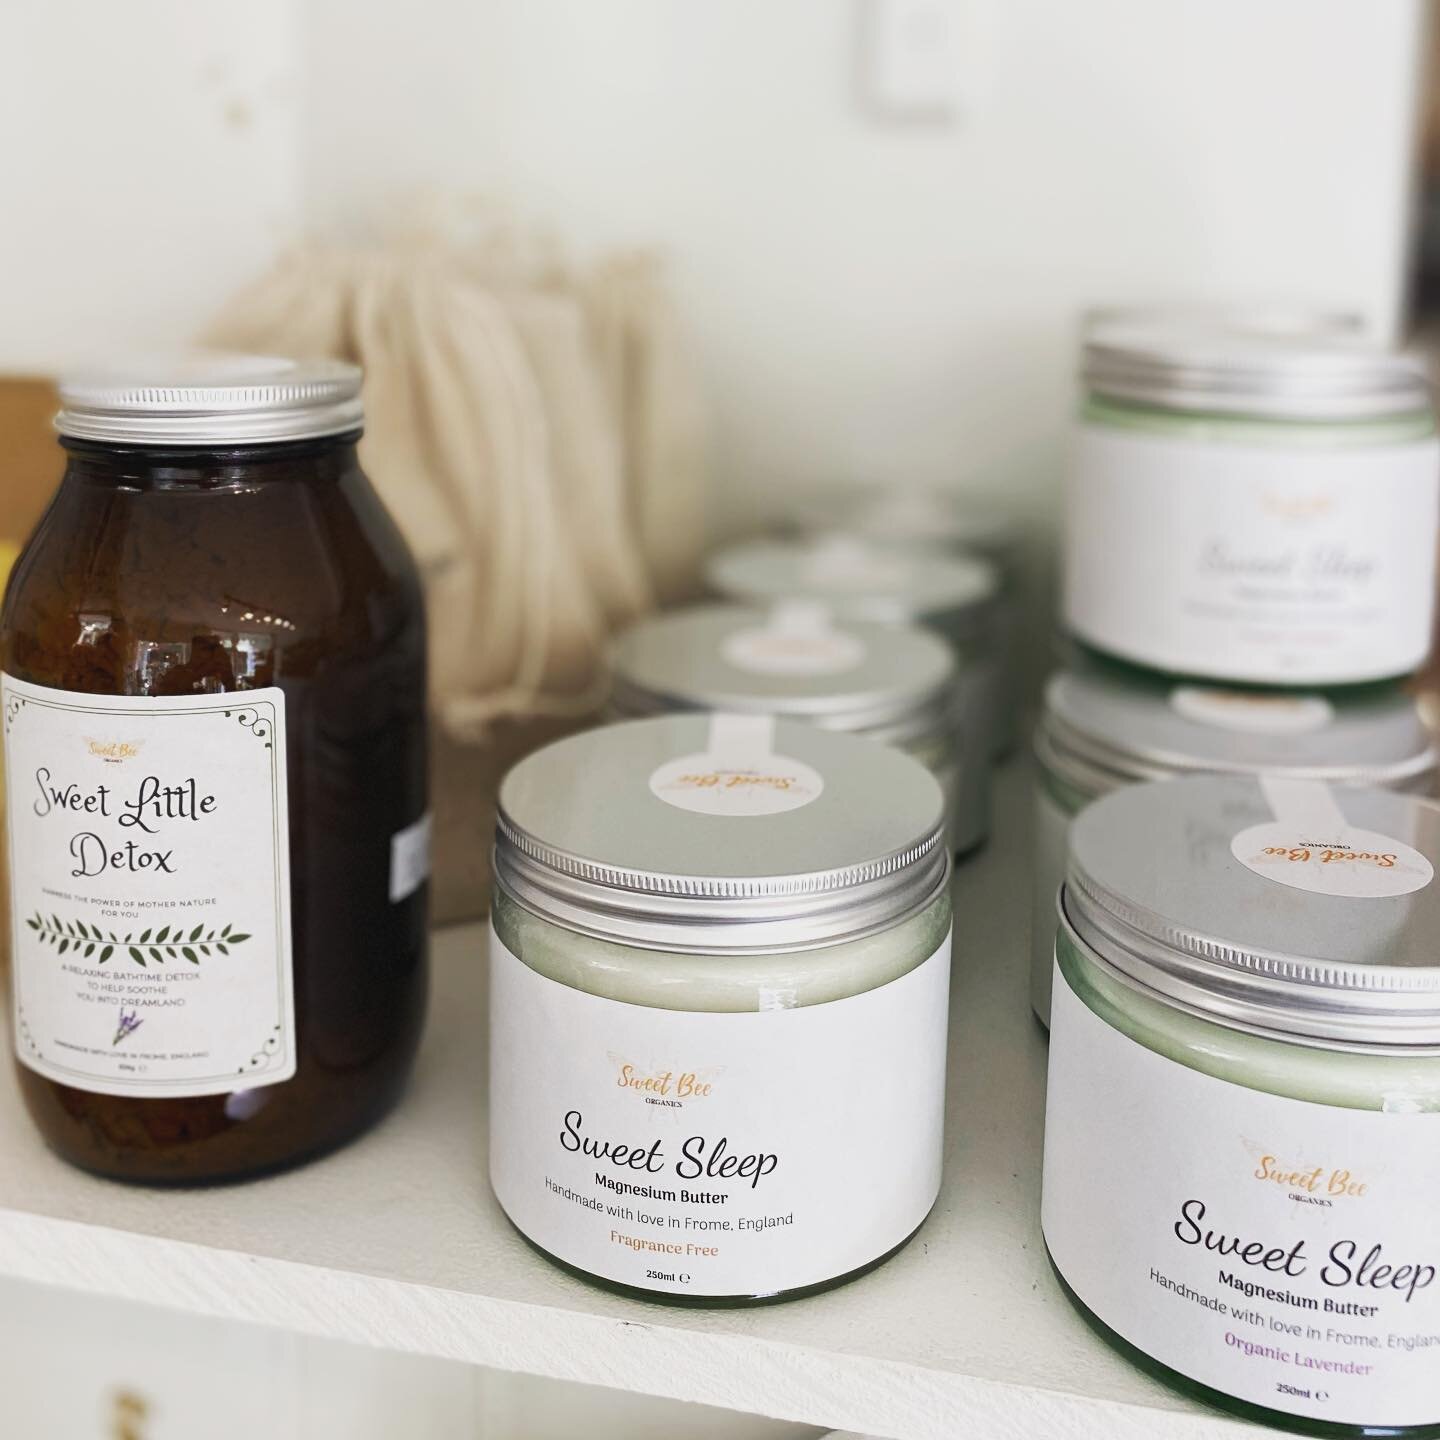 Sweet Sleep is here 🙏 @sweetbeeorganics now filling the shelves at Honey on the Hill with the Sweet Sleep Magnesium Butter to help soothe your system, especially before bed, for those restless legs. 
Our bodies are often lacking in Magnesium and thi